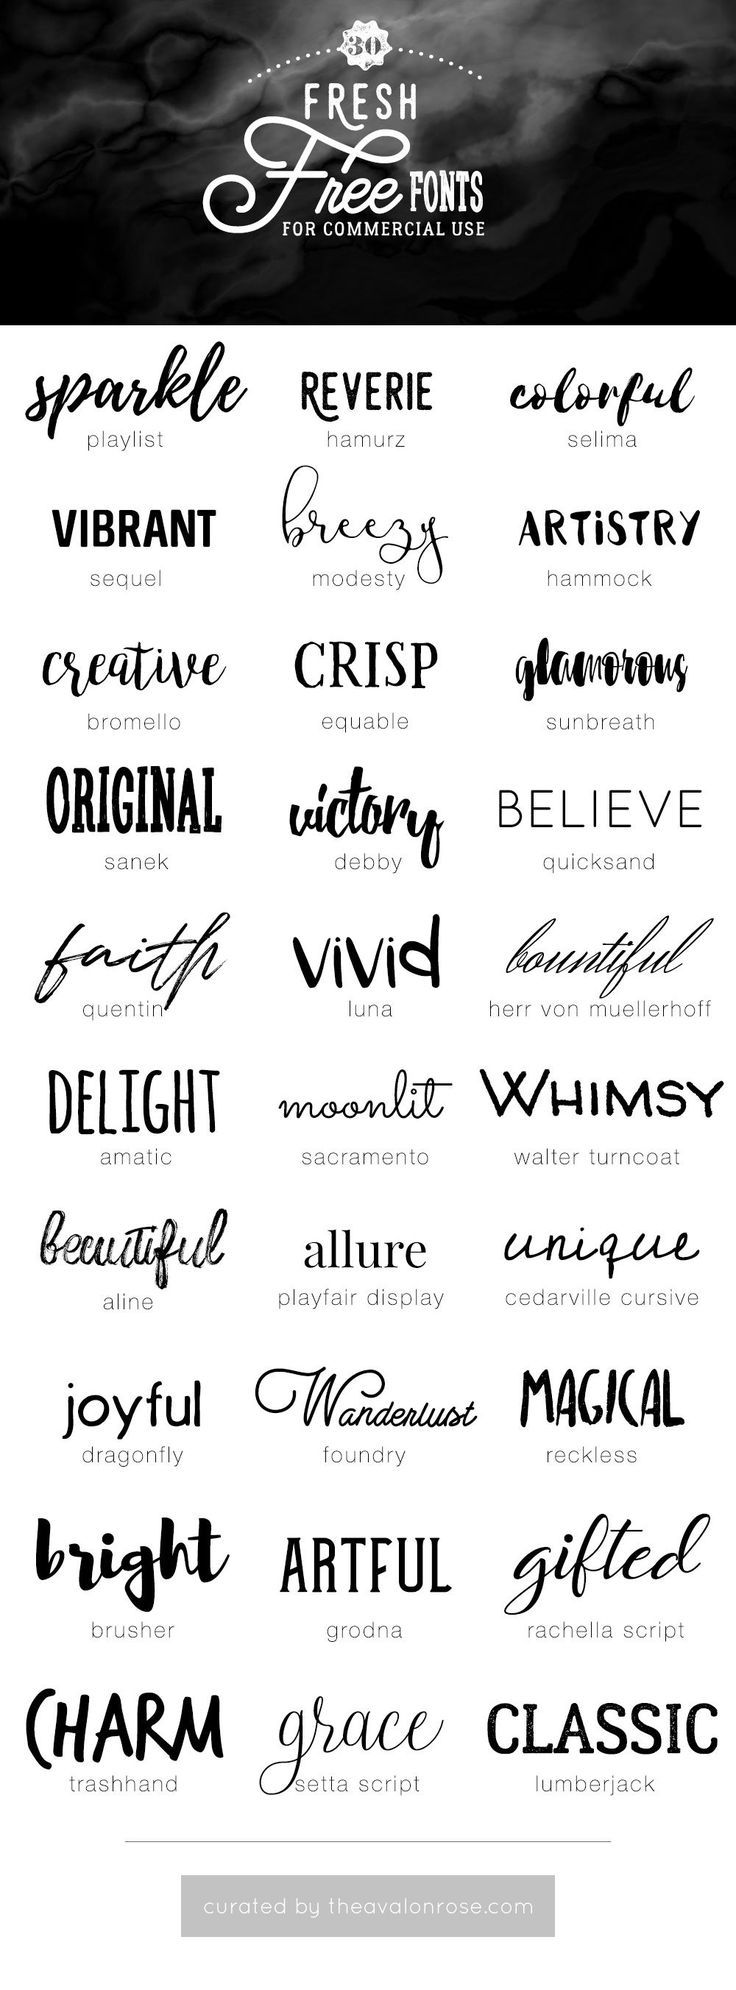 which fonts are copyright free